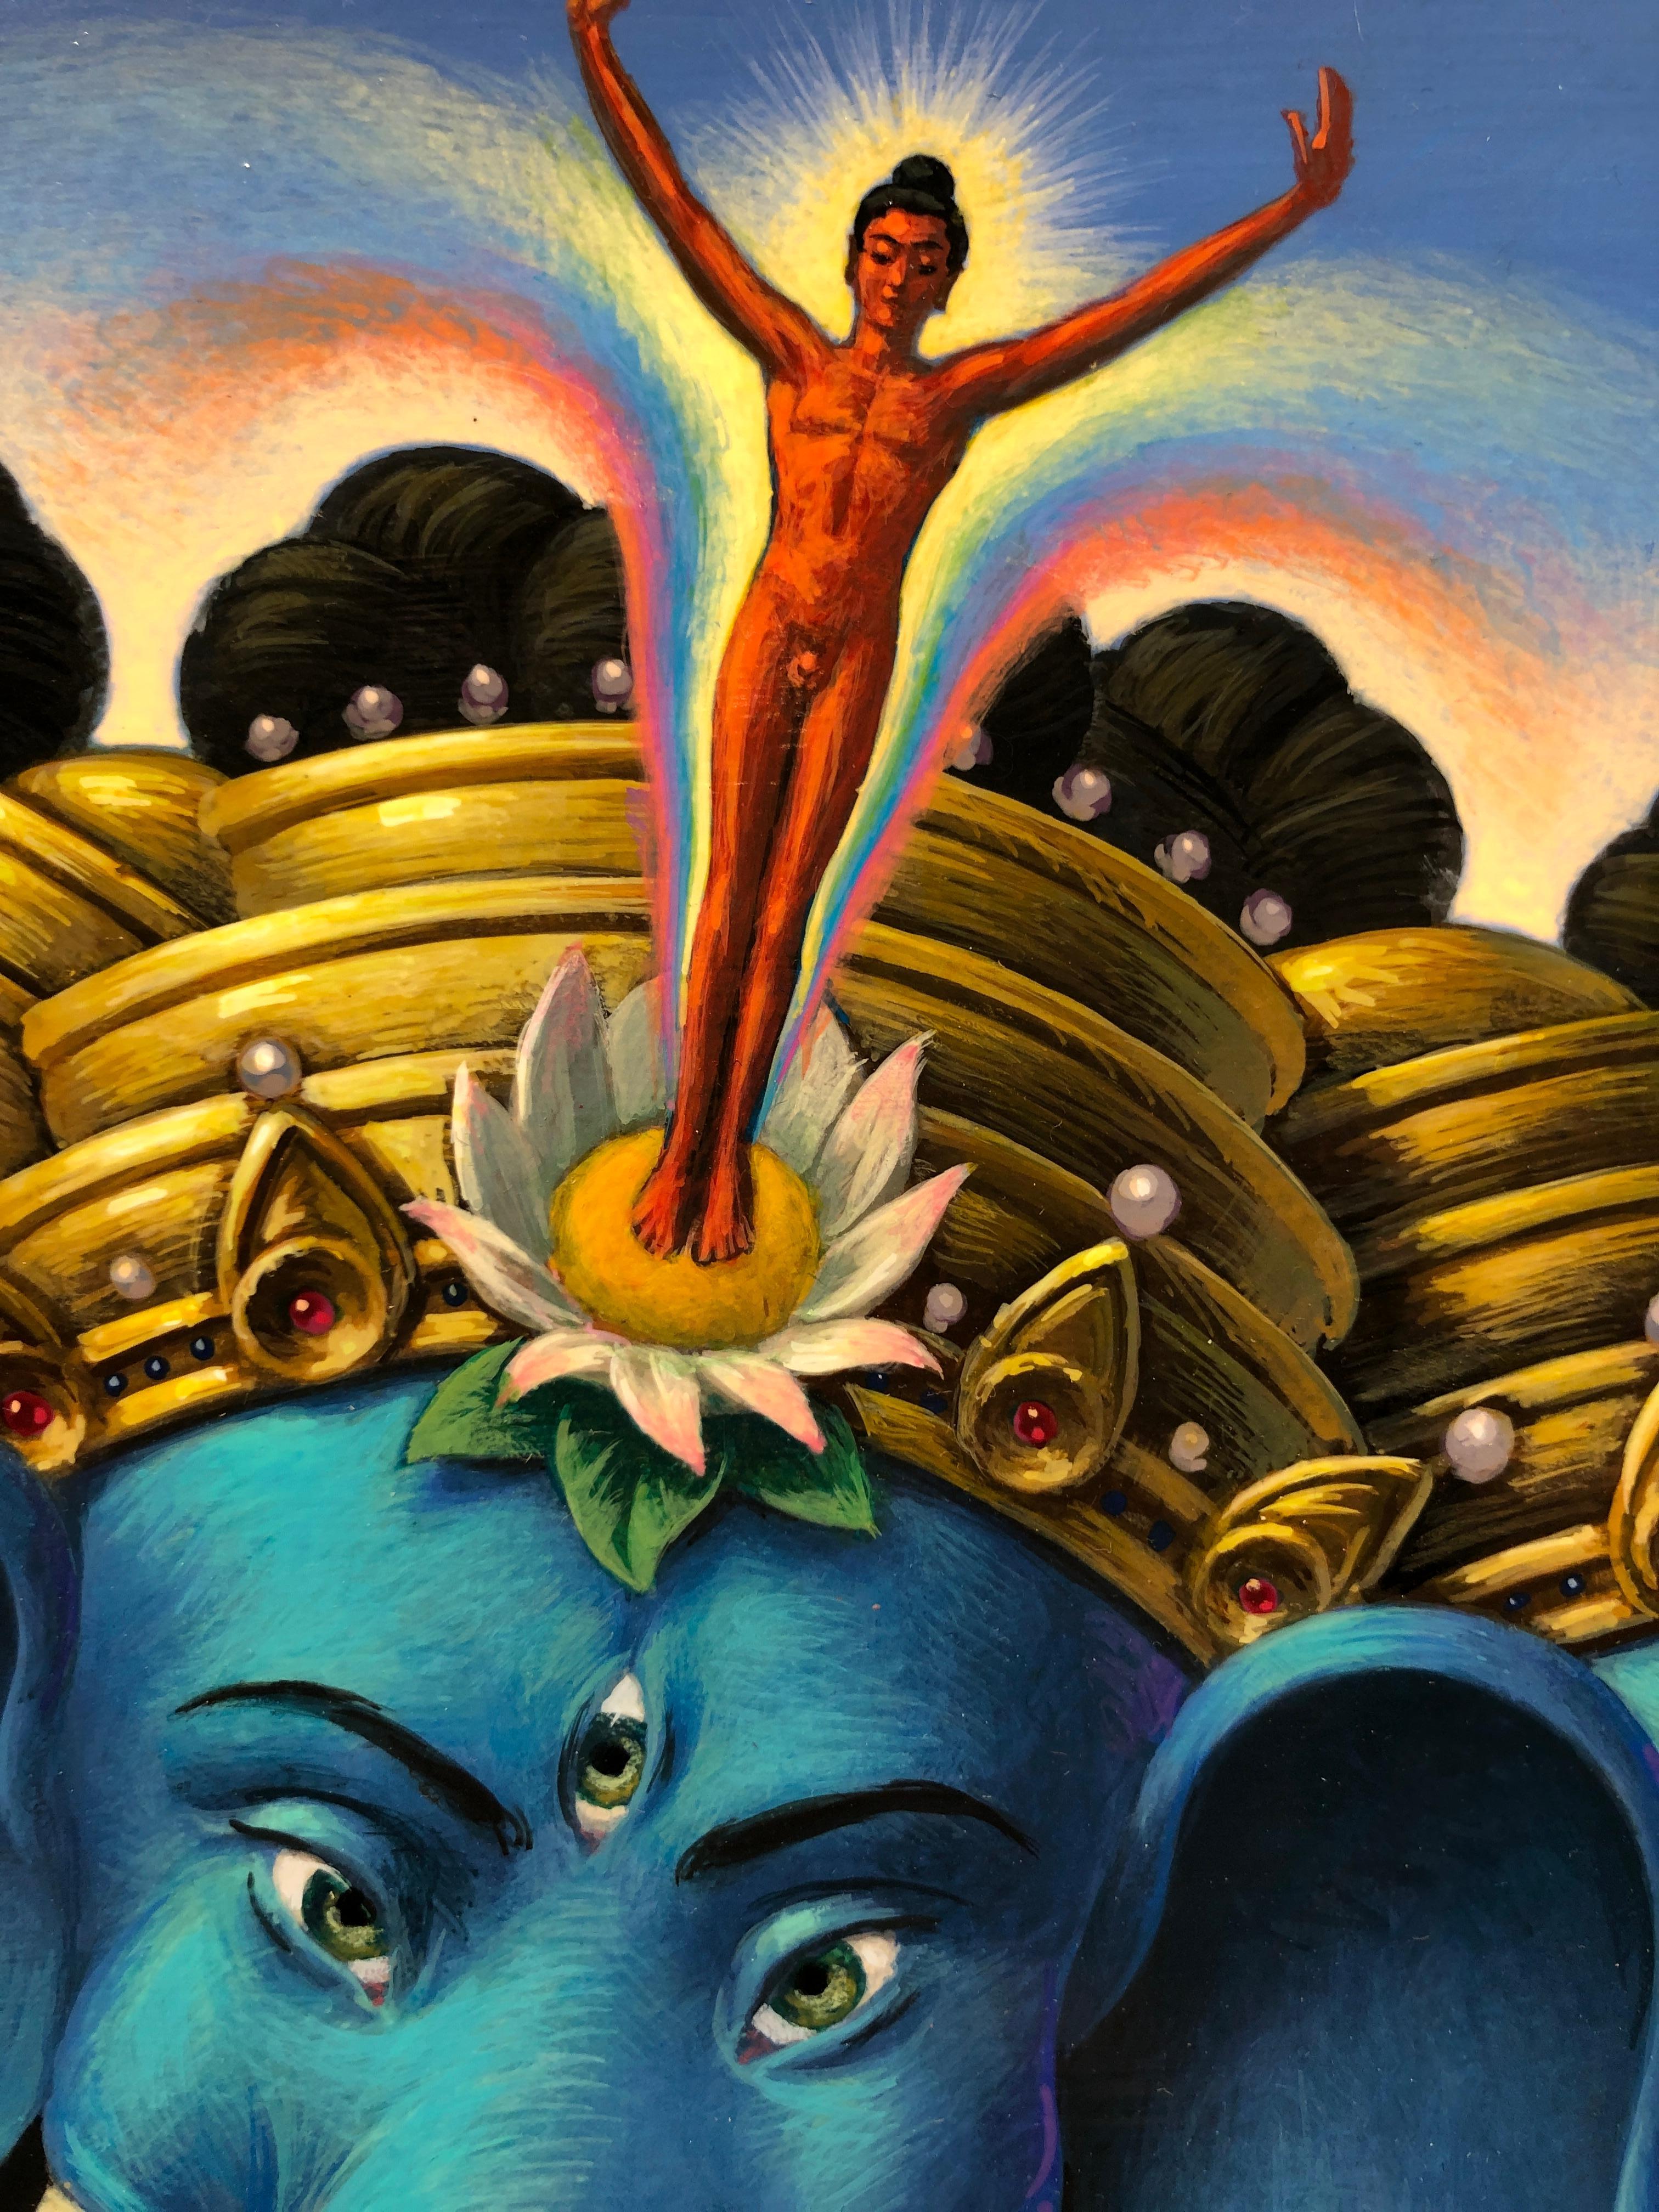 Ganesh at the Maelstrom - Highly Detailed Surreal, Symbolic Painting 12